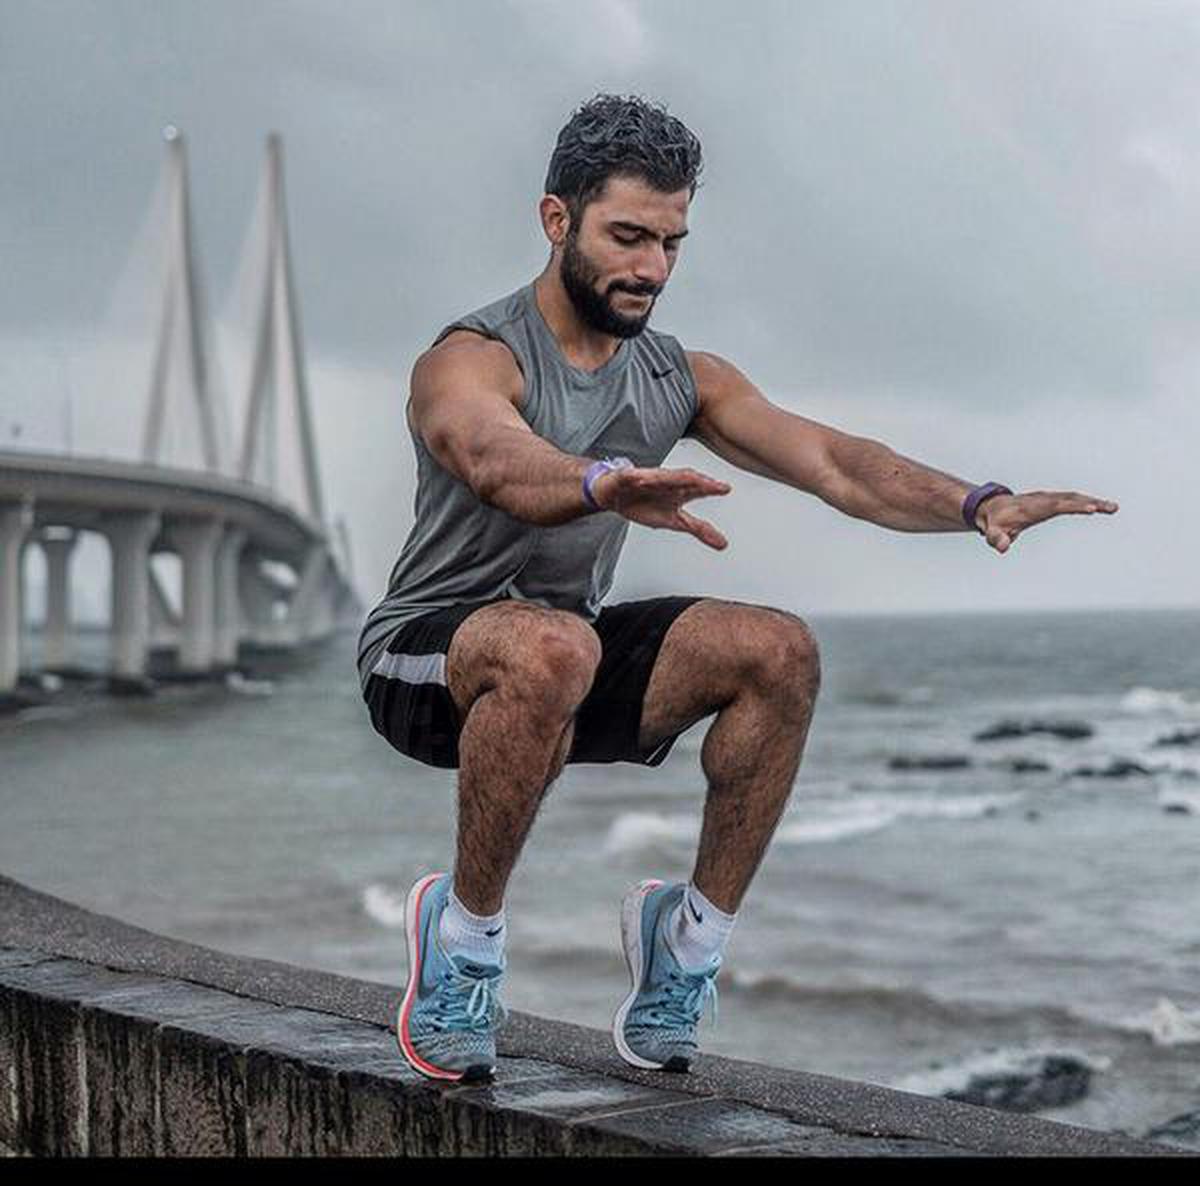 Nike's male ambassador from India, Rajput on his fitness - The Hindu